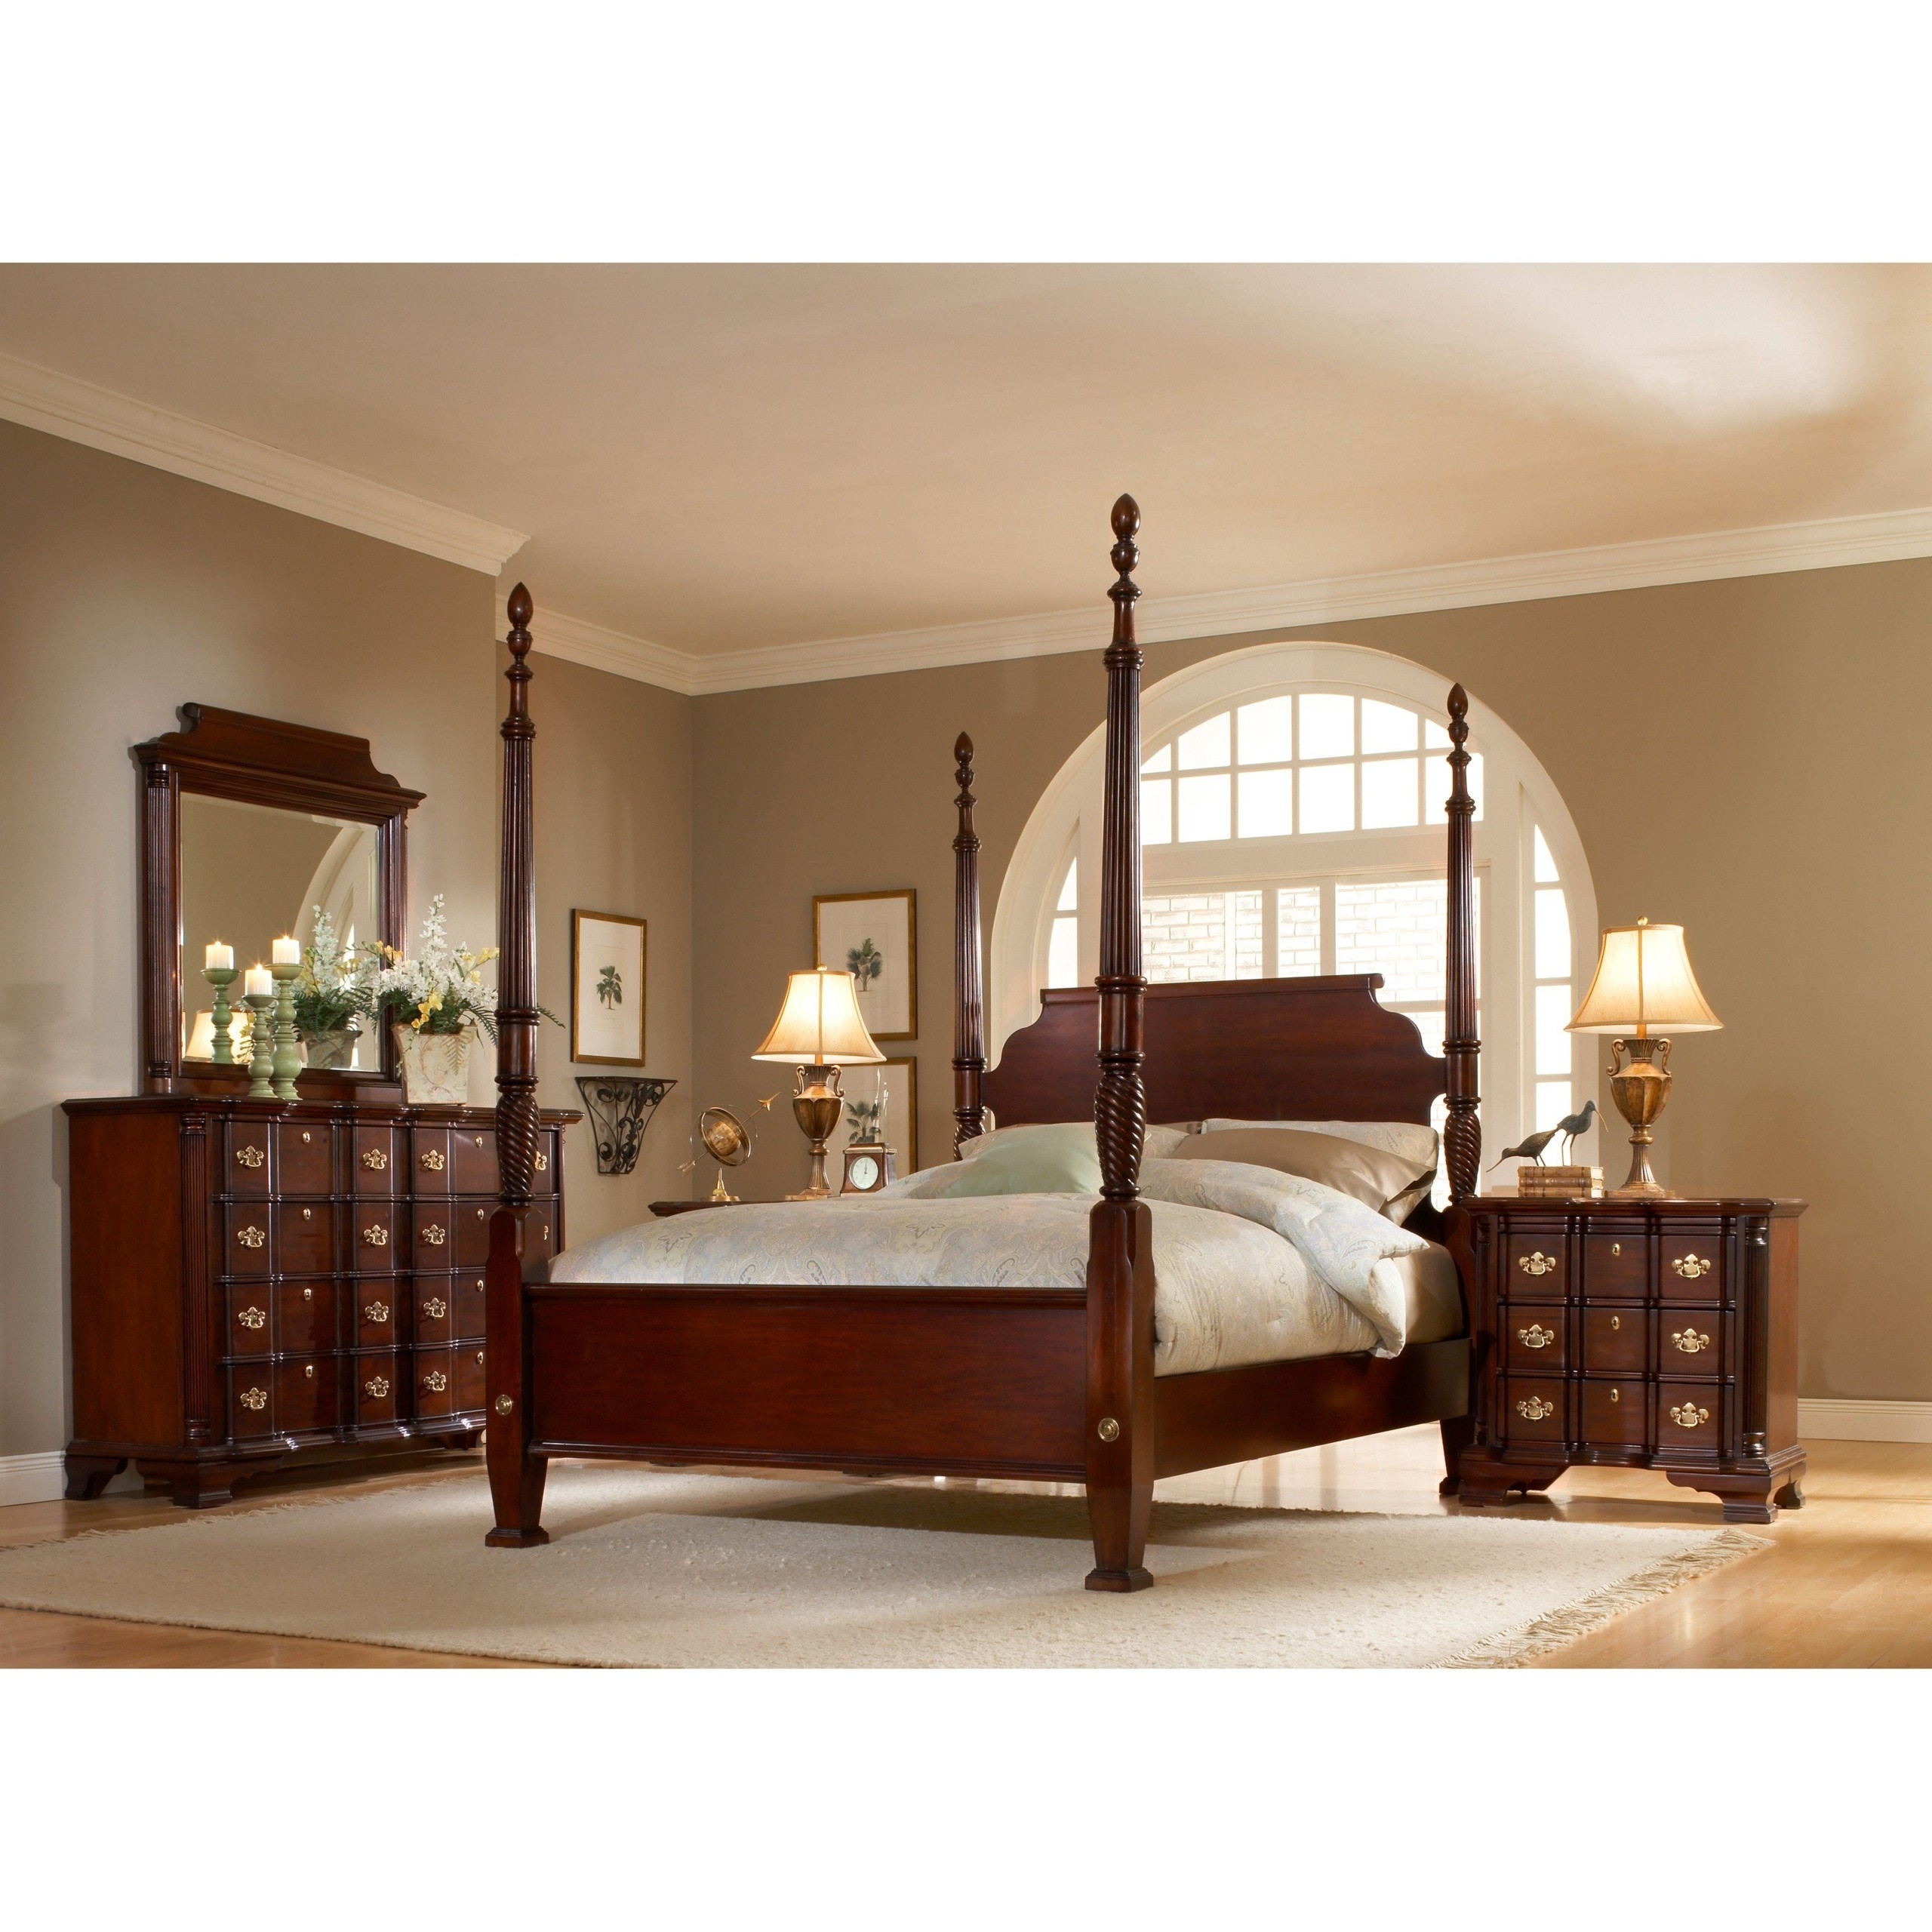 King Size Four Poster Beds - Foter